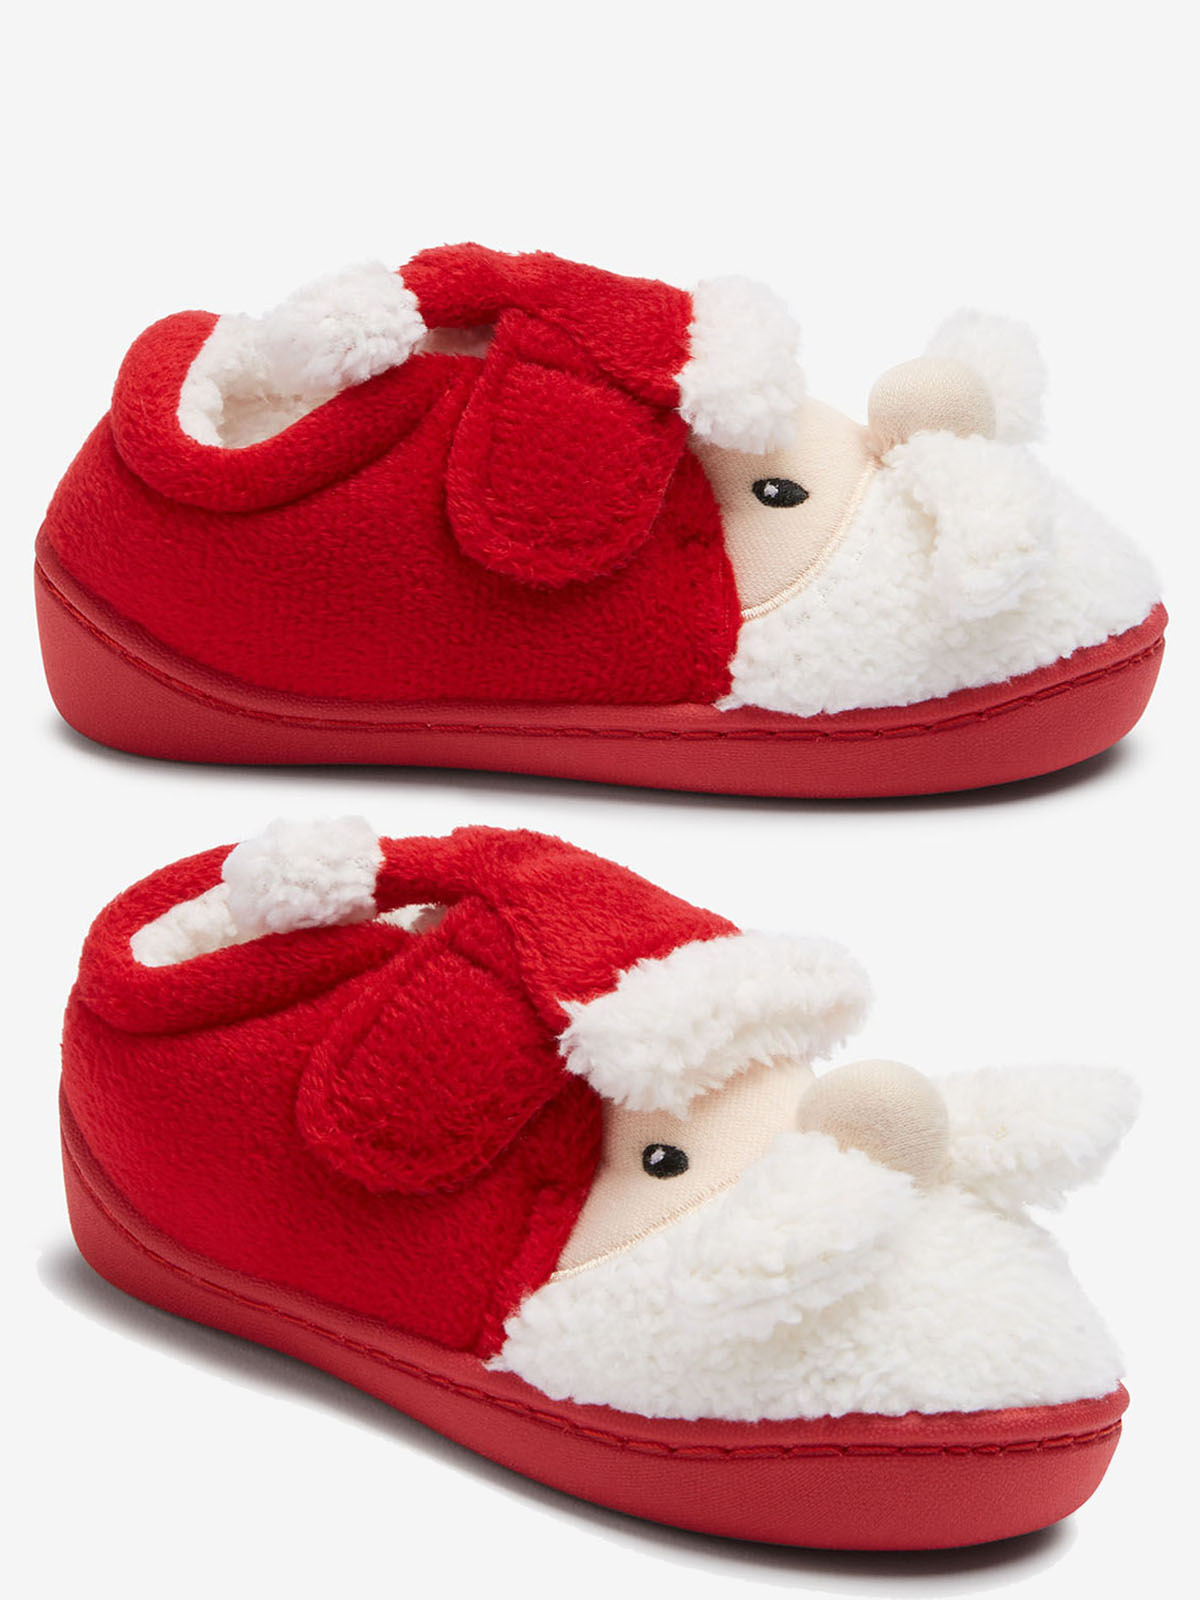 RED Unisex Toddler Touch Fasten Novelty Festive Santa Slippers - Shoe Size 5 to 6